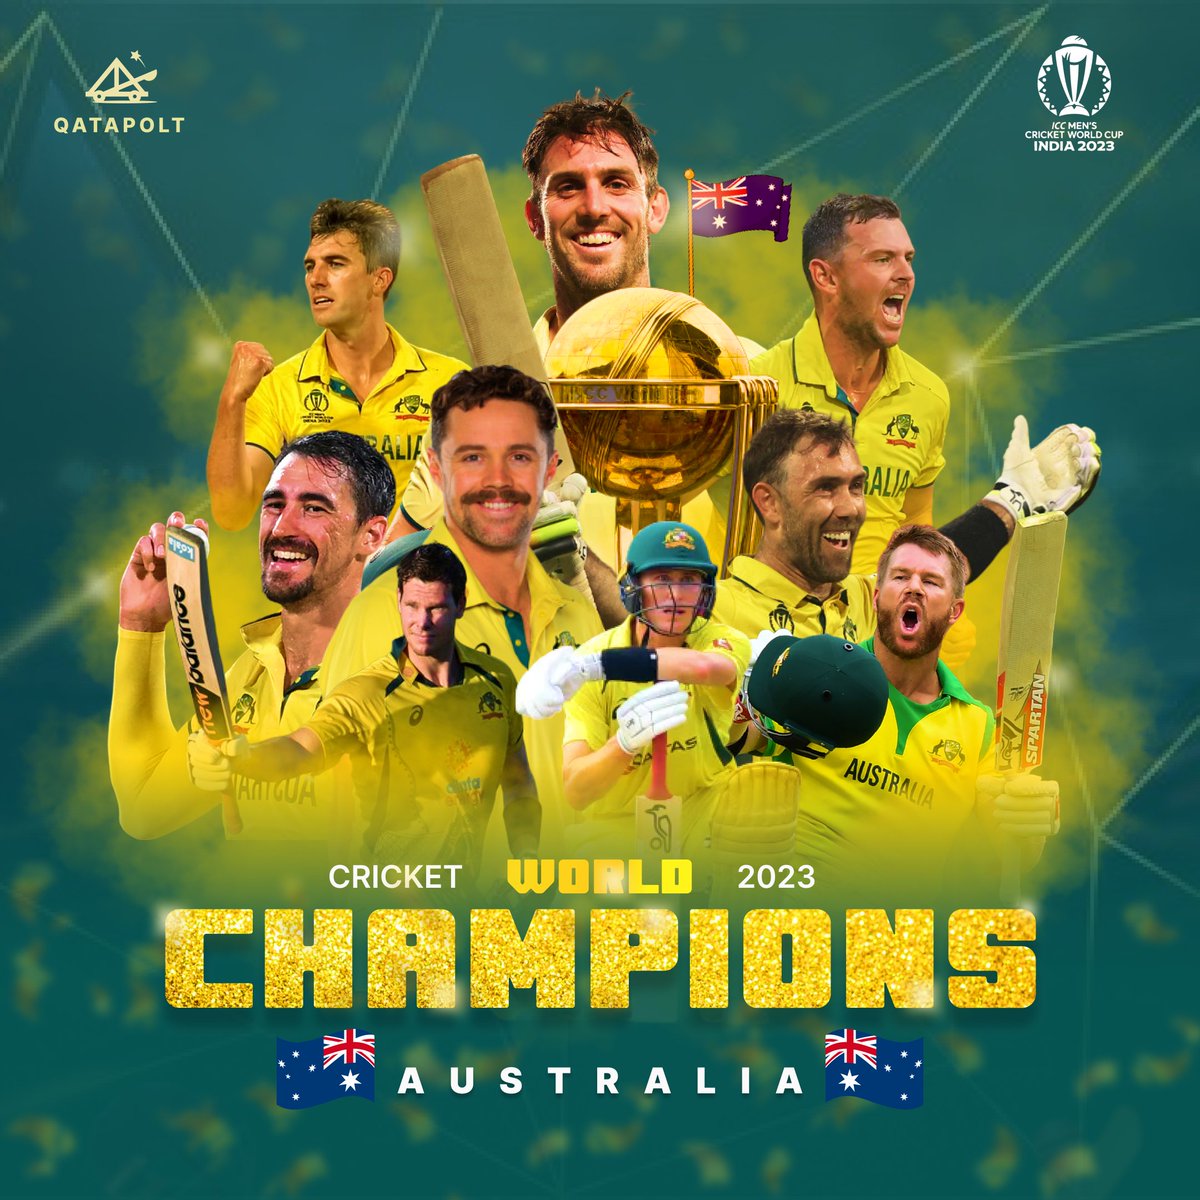 Down under, rising above! 🏏🇦🇺 Australia claims the Cricket World Cup 2023. Witness the glory and celebrate the cricketing brilliance. 🏆🔥
_
_
_
_
 #CWCChamps #AussieDominance #cricket #ipl #viratkohli #rohitsharma #msdhoni #india #t #icc #cricketlovers #cricketfans #love